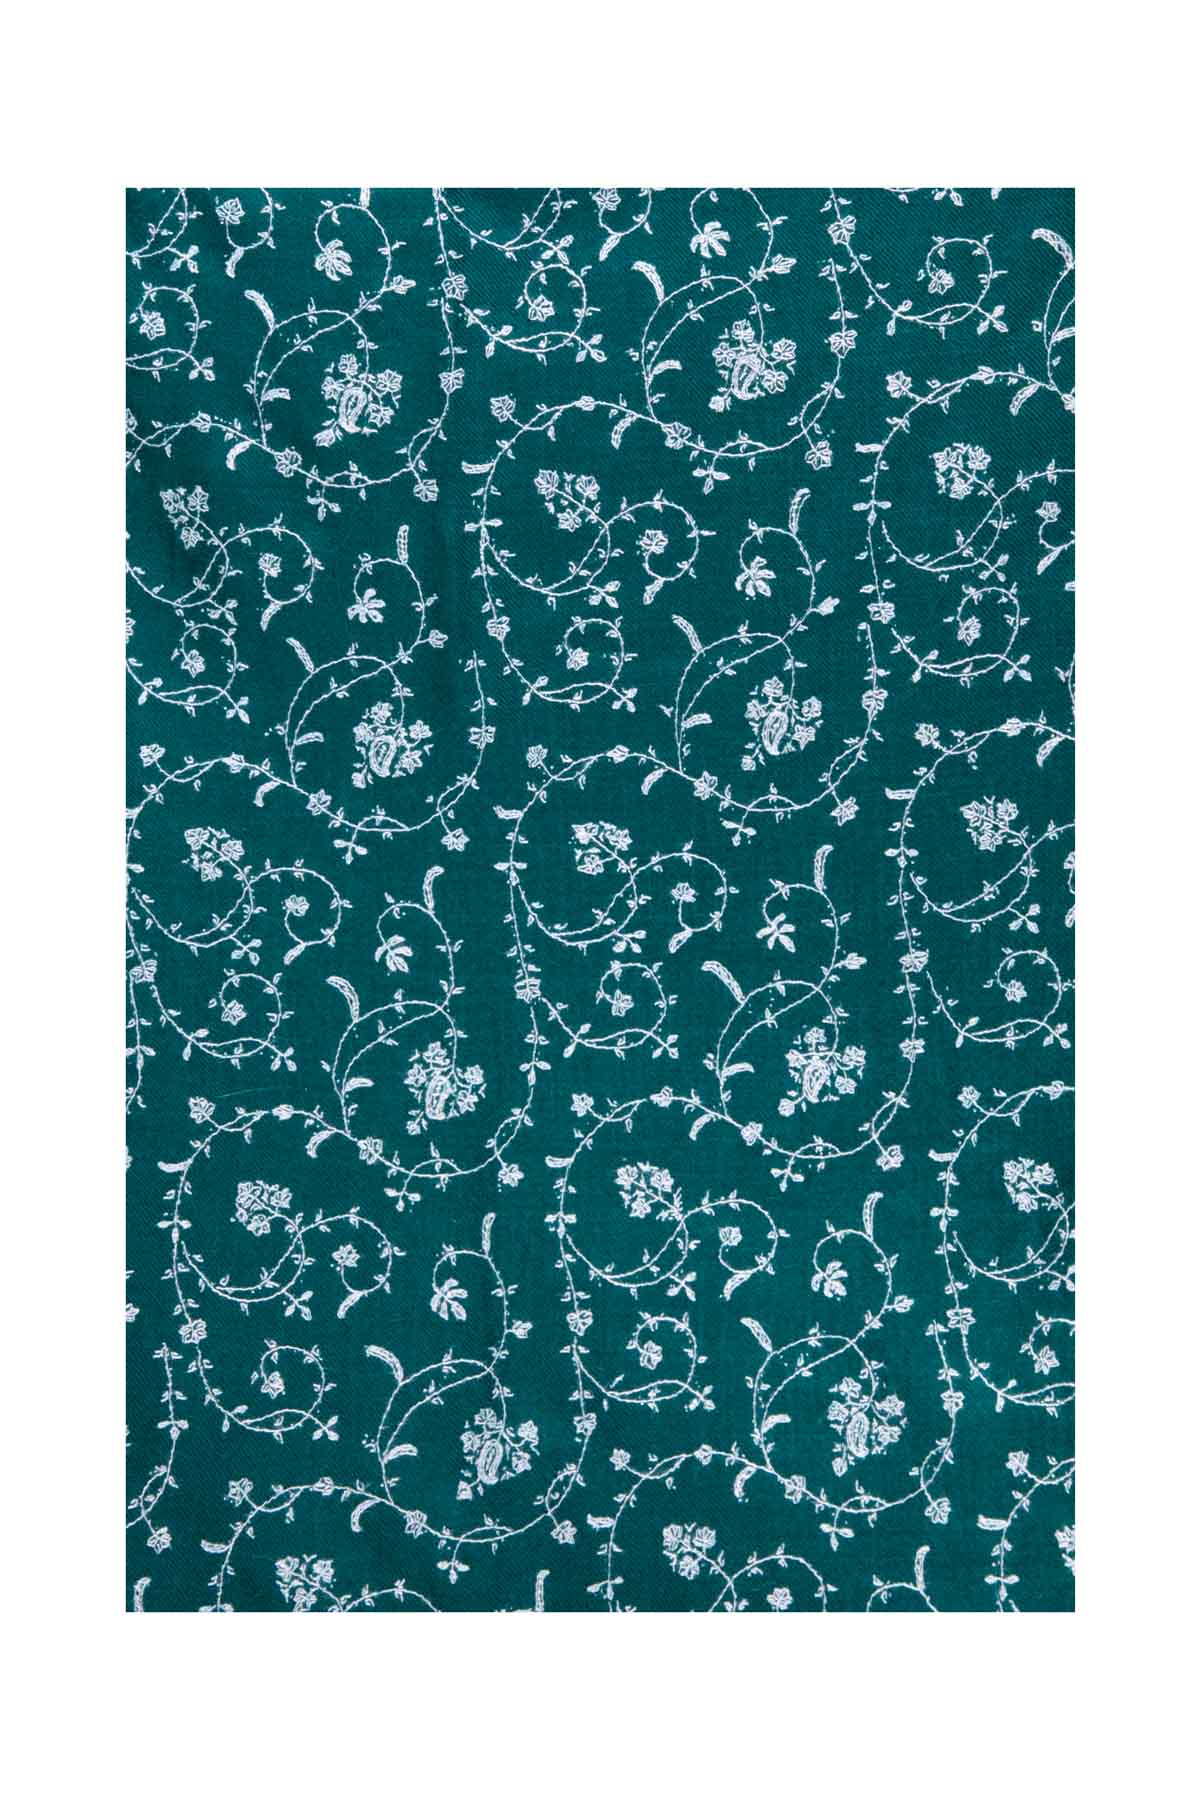 Full Floral Embroidered Pashmina Shawl - Green & White